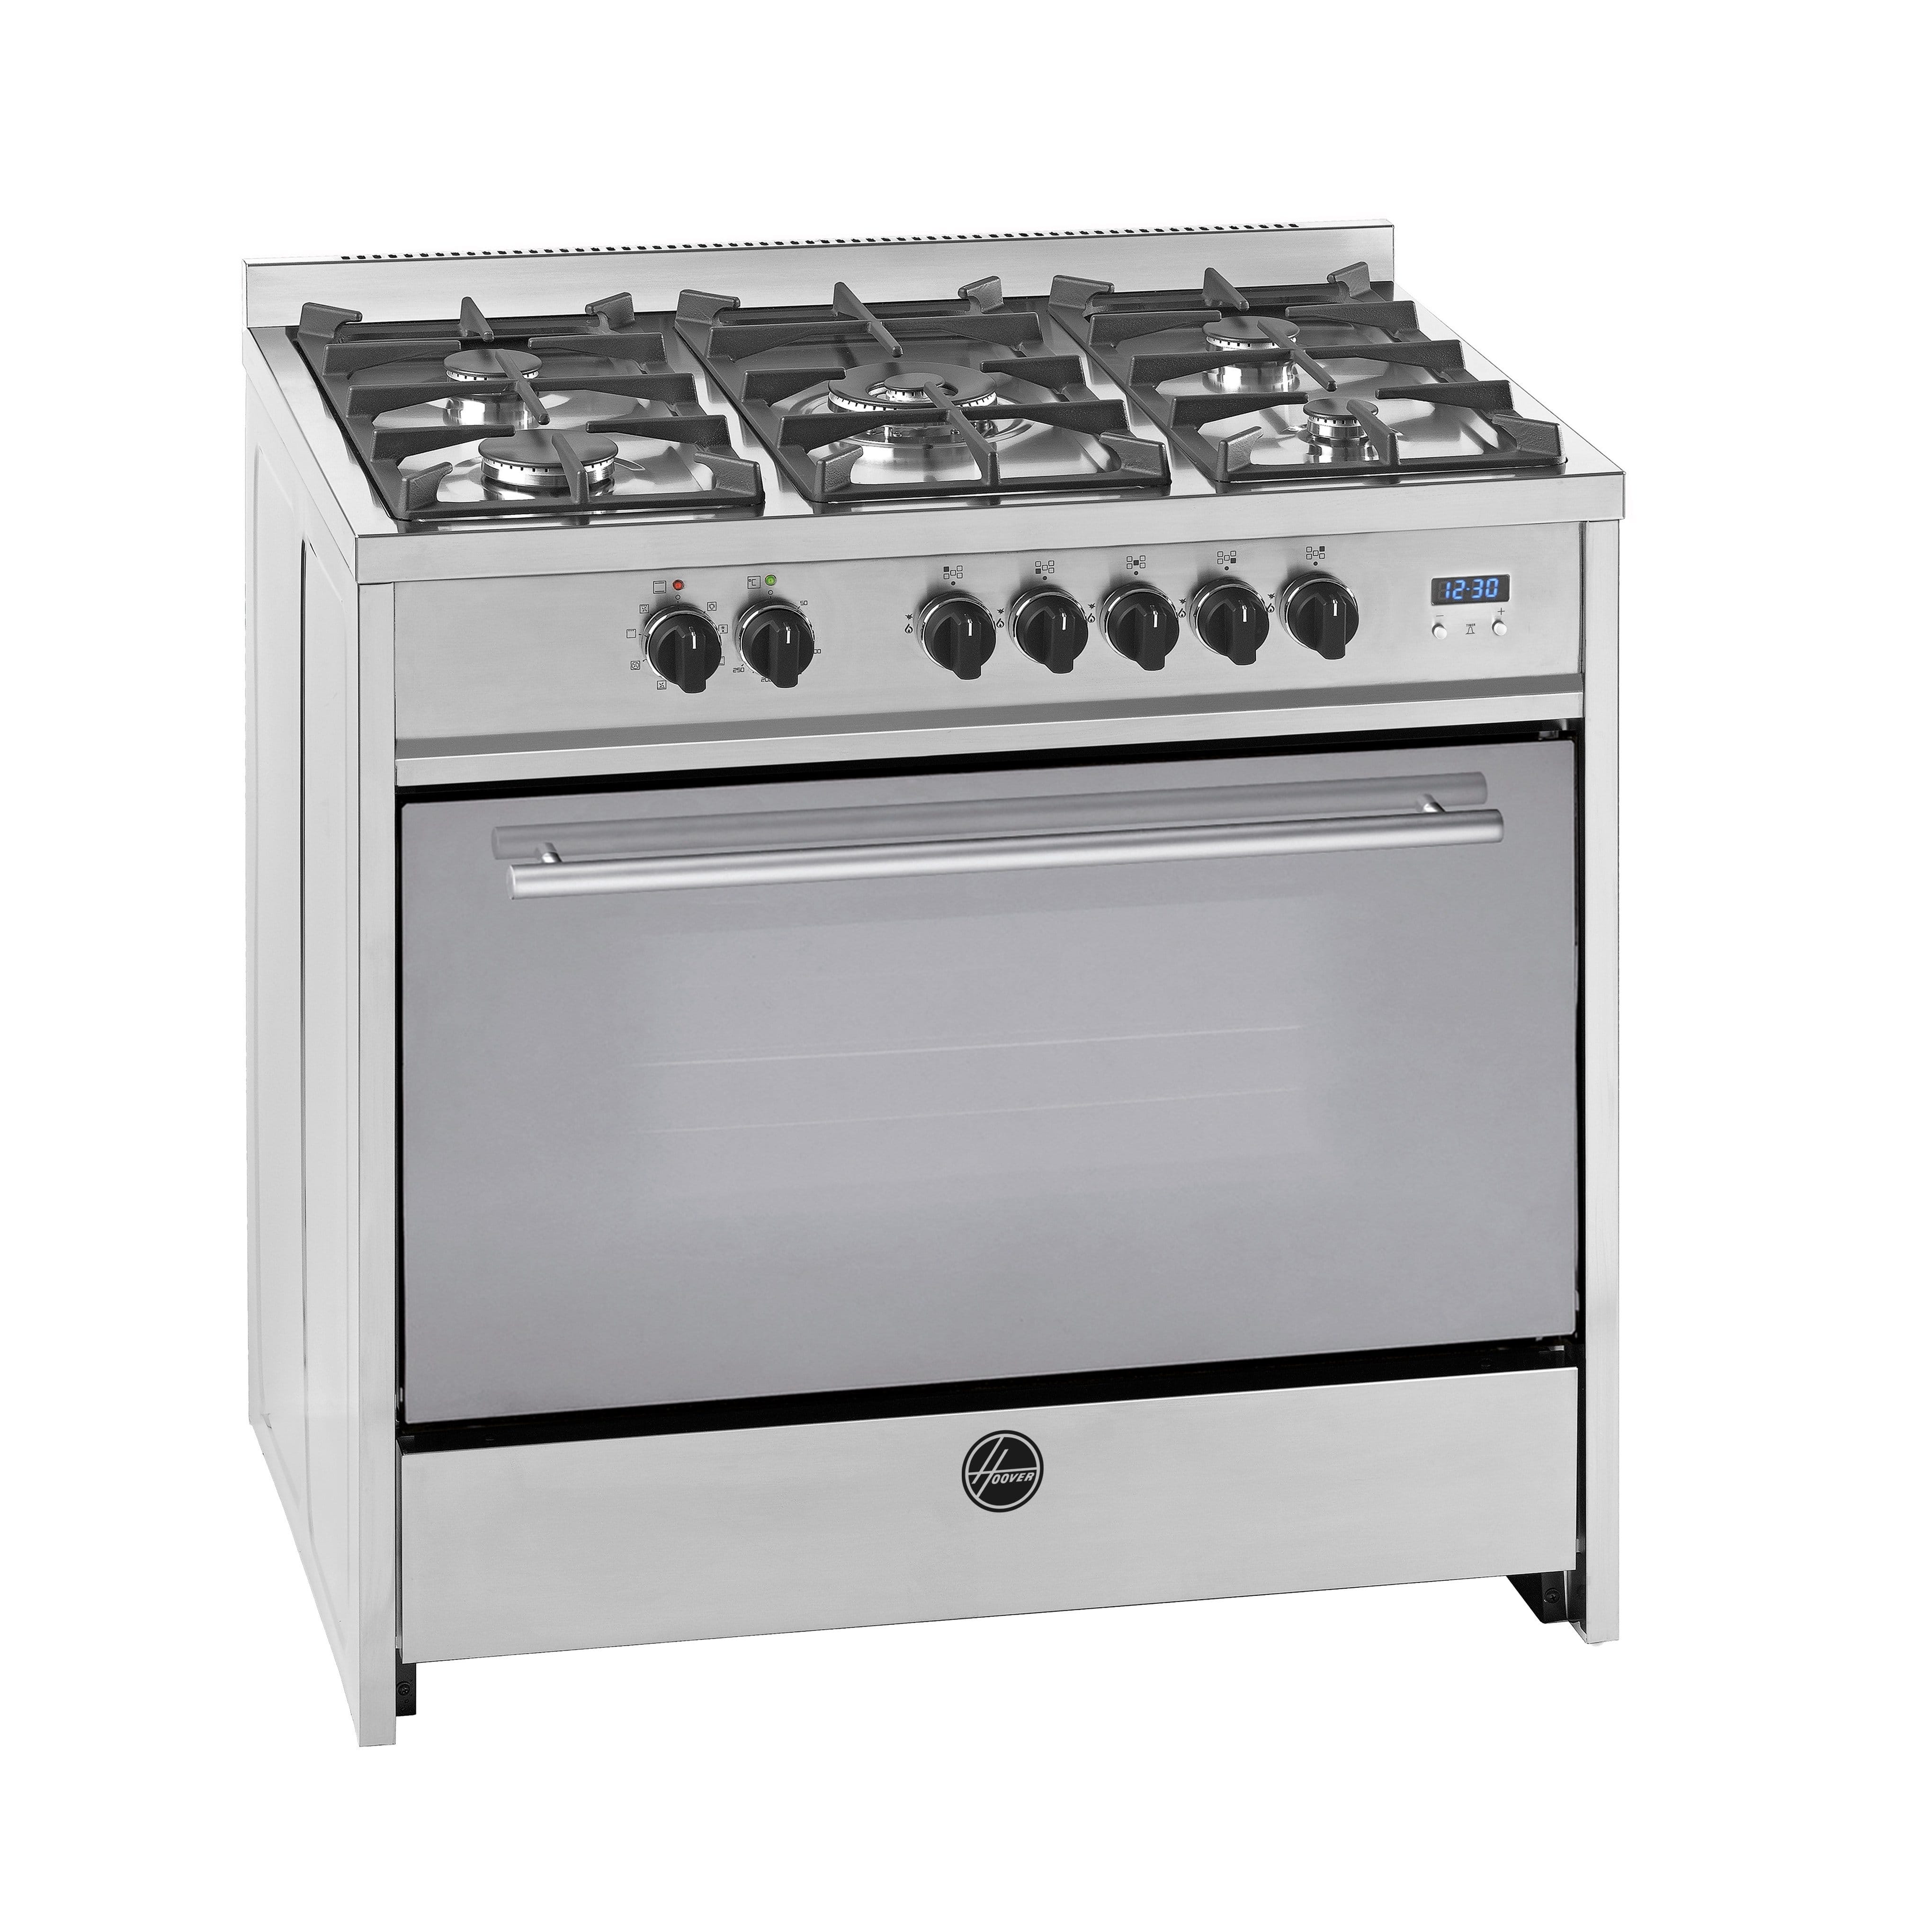 HOOVER 90X60 FUL GAS COOKER, CAST IRON -SLIVER, HGC- M95G-01X